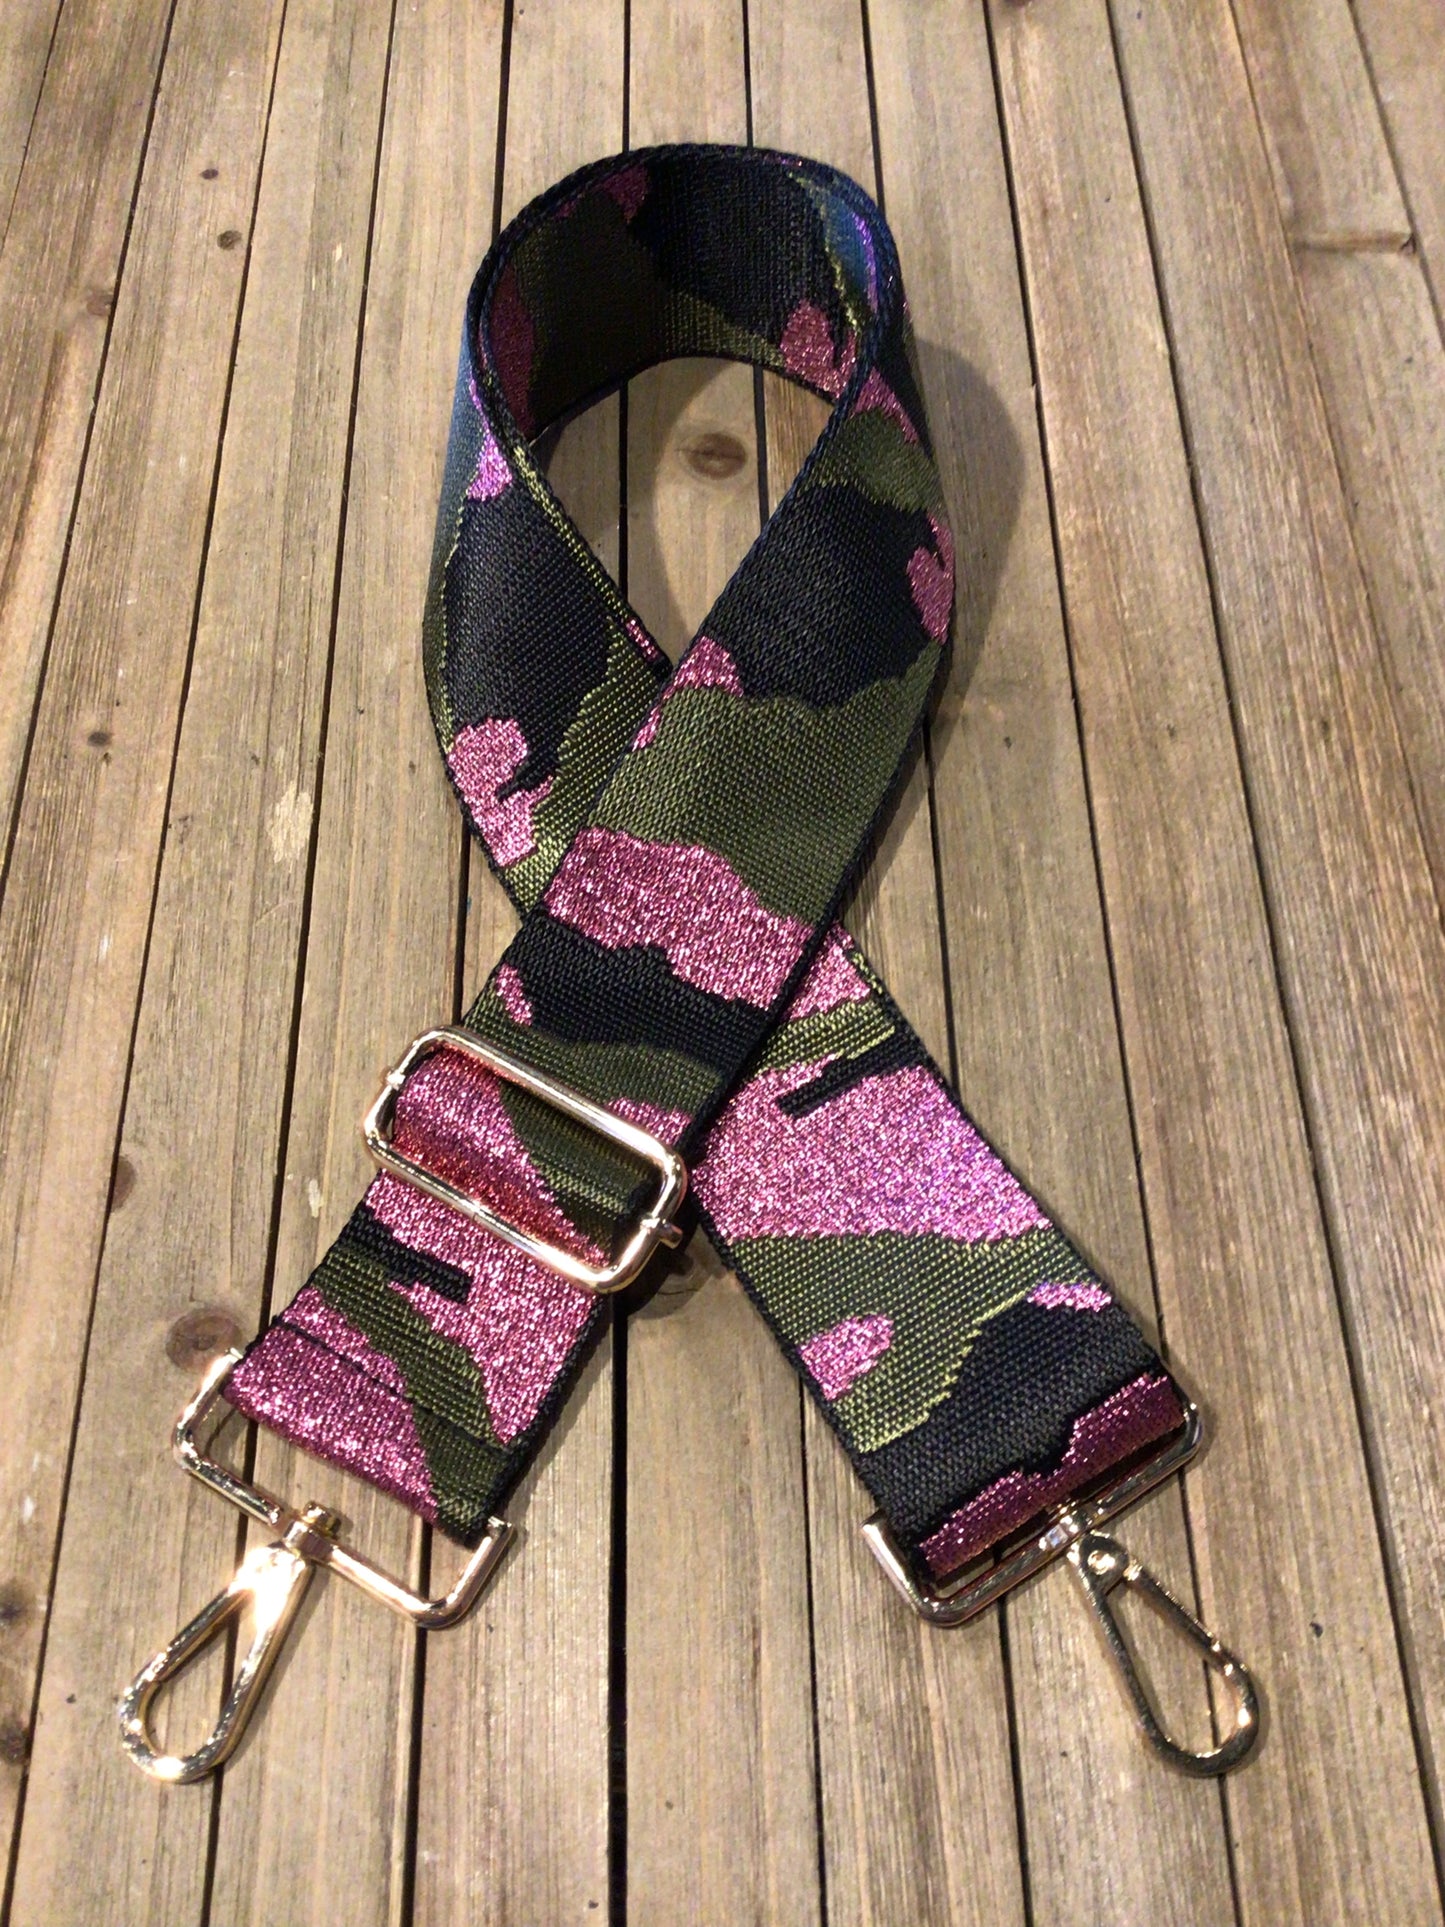 2" Adjustable Embroidered Bag Strap - Metallic Hot Pink, Black, And Olive Green Camo